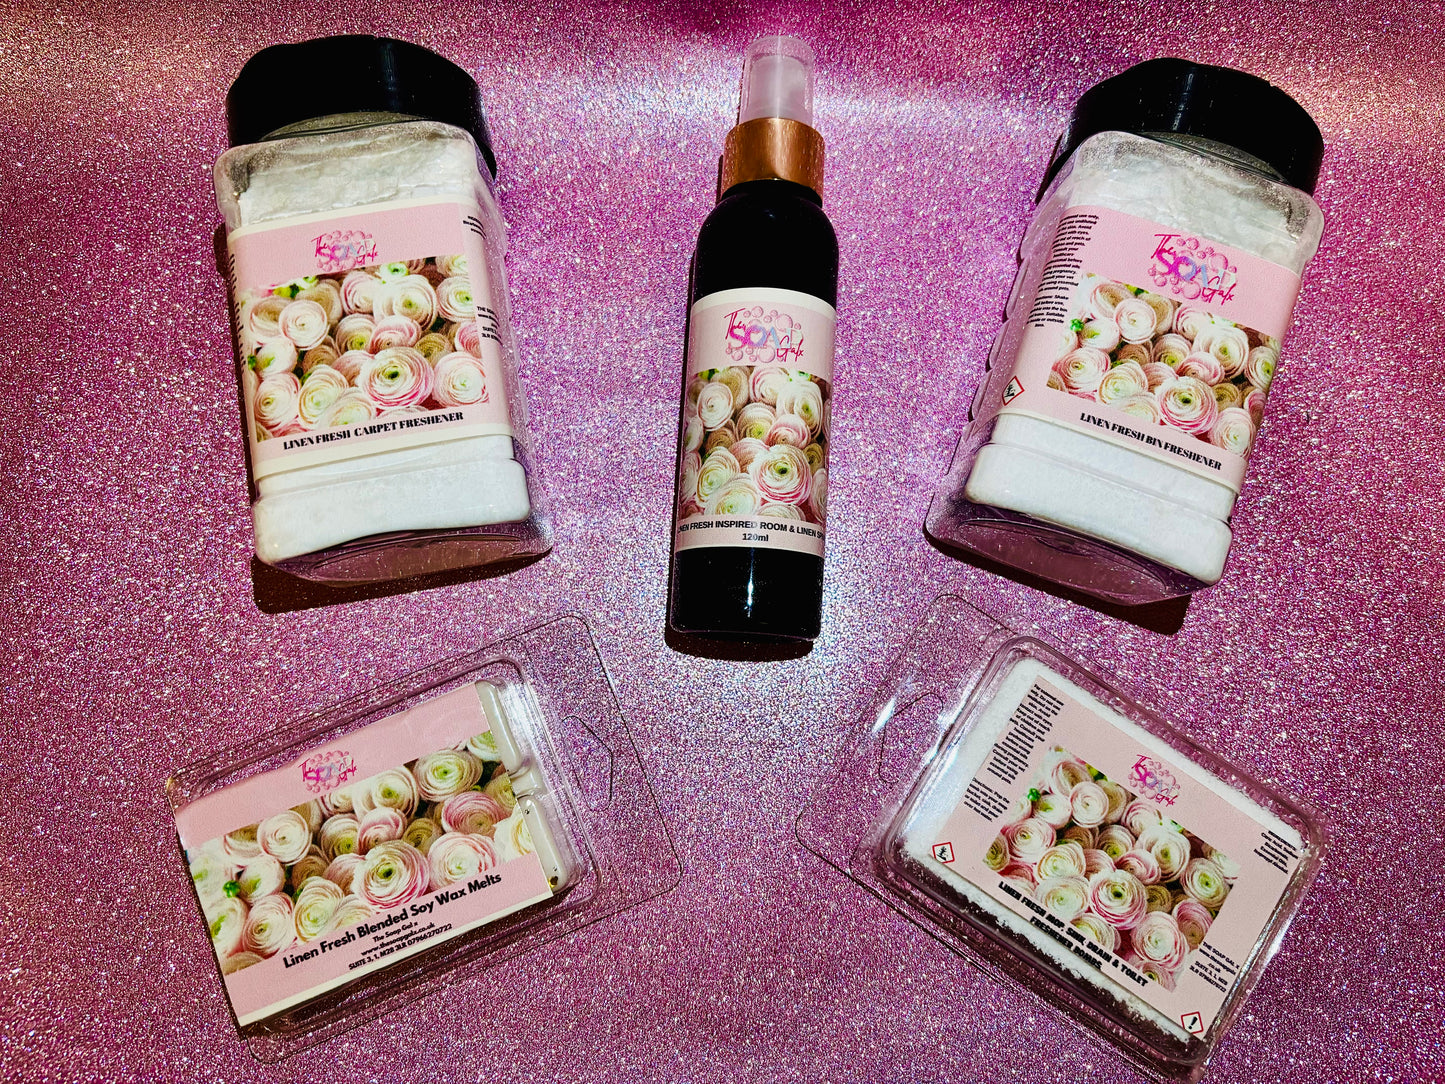 Cosmetic products with floral labels displayed on a glittery pink surface now include The Soap Gals' luxury perfumes.